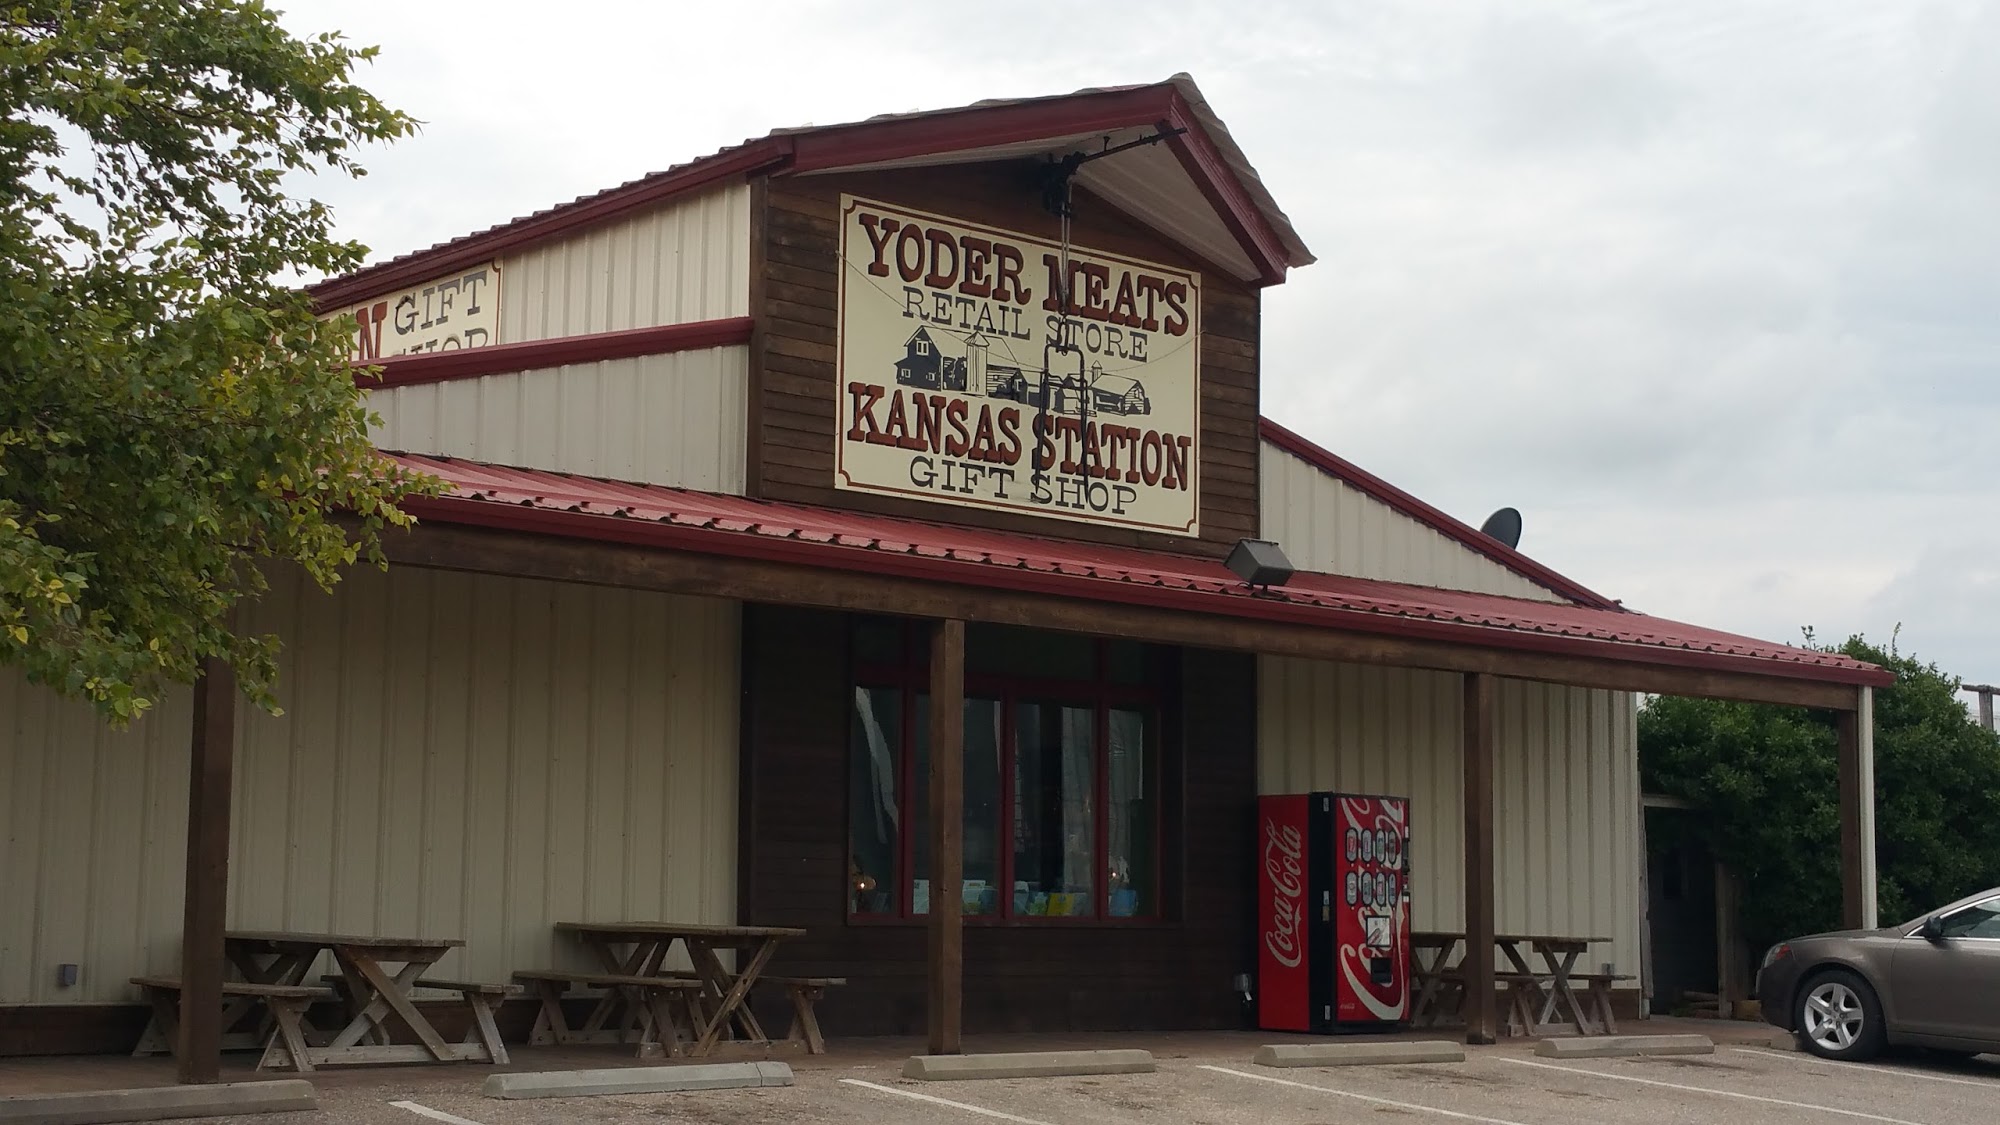 Yoder Meats